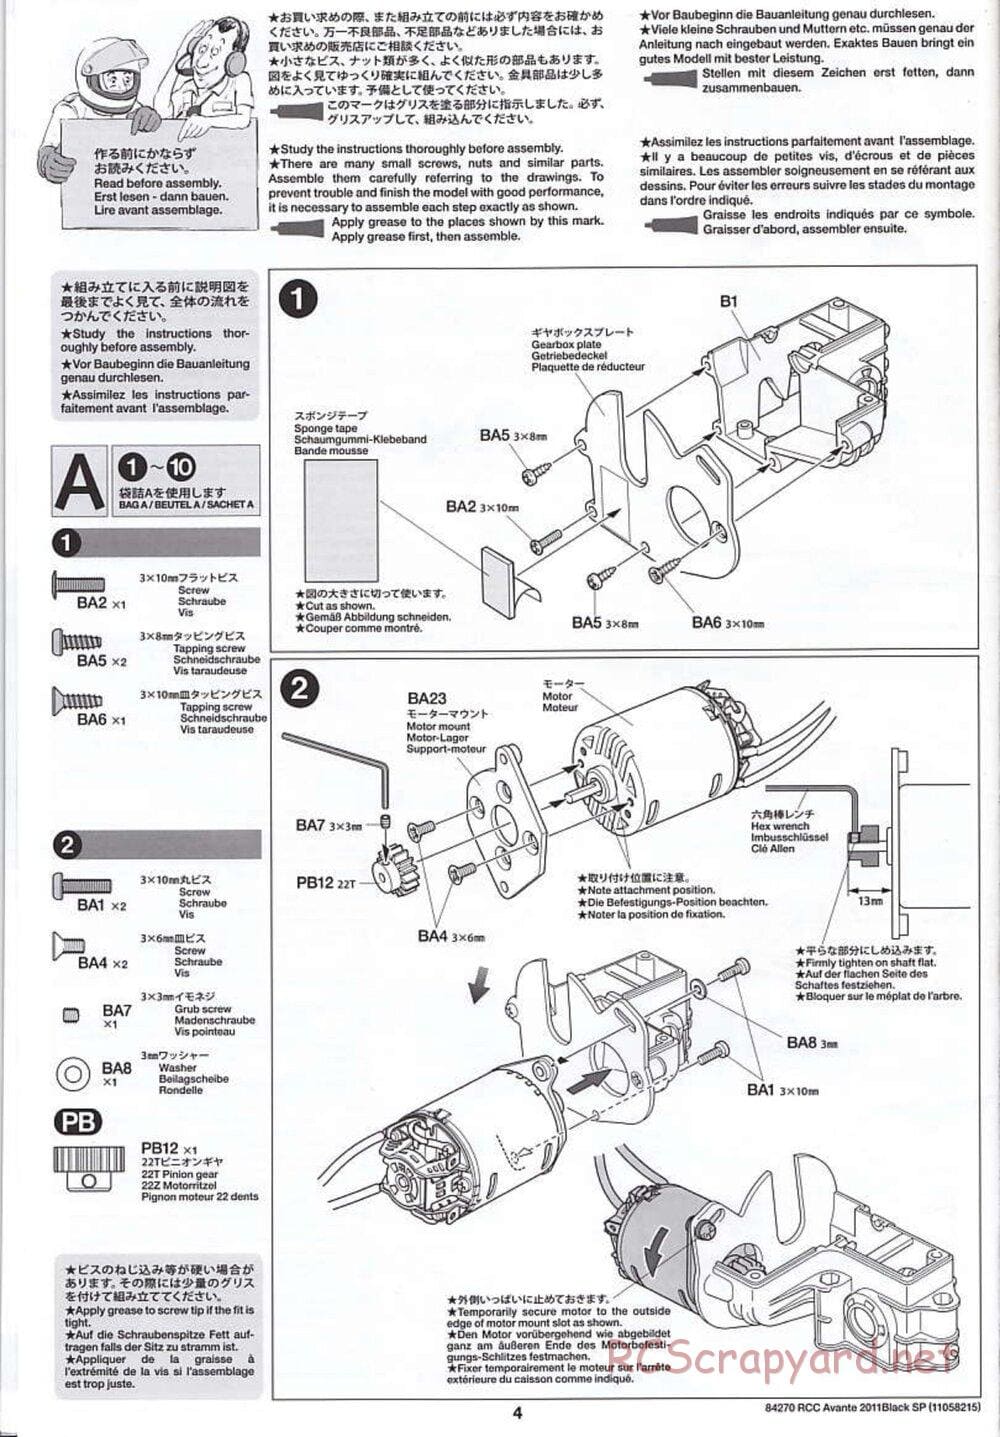 Tamiya - Avante 2011 - Black Special Chassis - Manual - Page 4